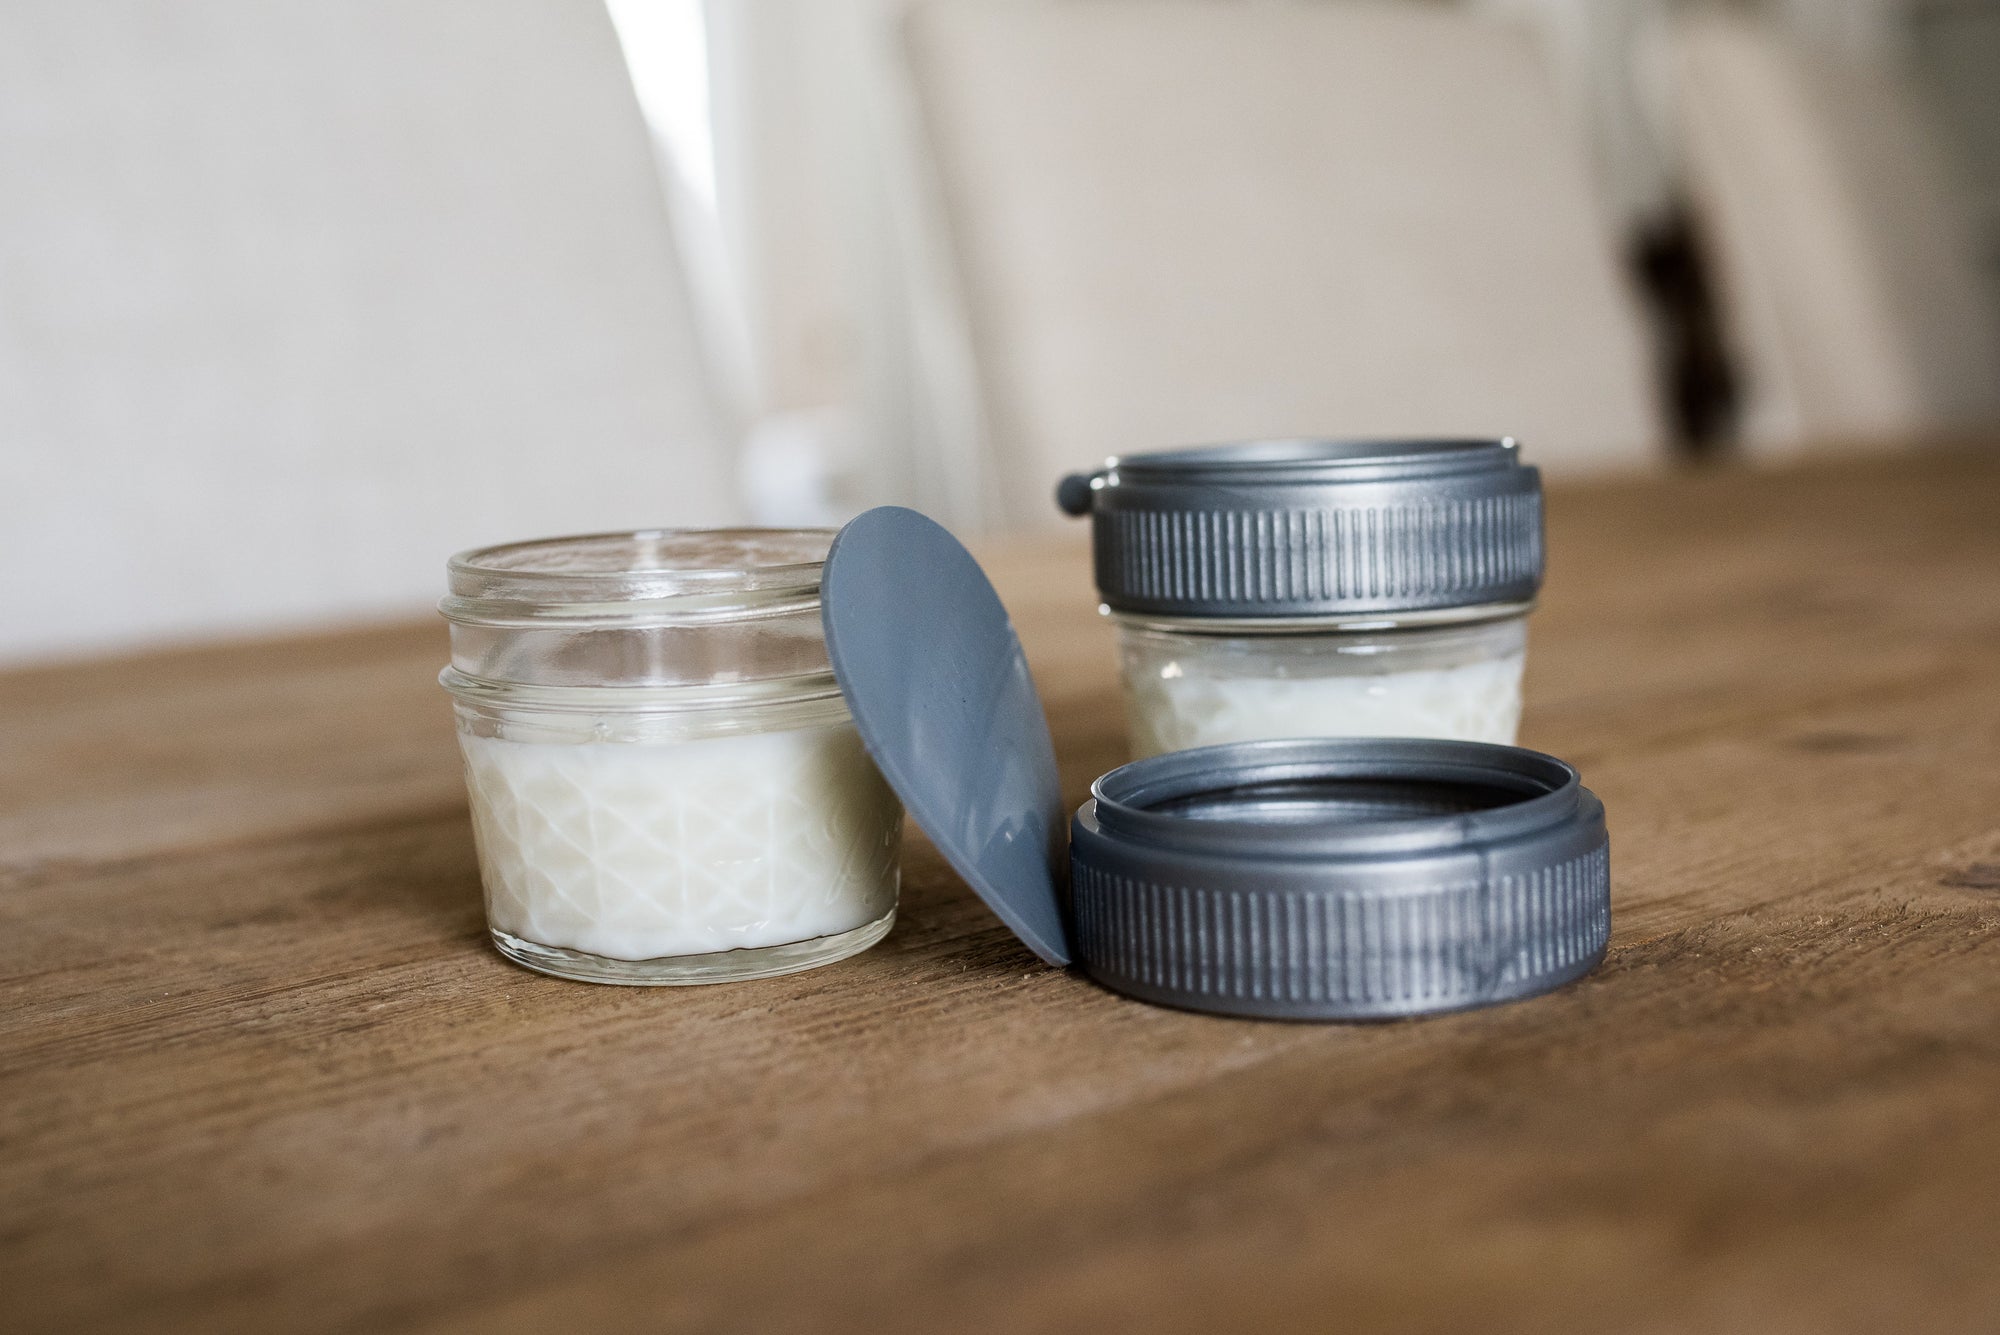 Storing Milk in Mason Jars - You Won't Spill a Drop of Milk or Waste a Minute of Your Time